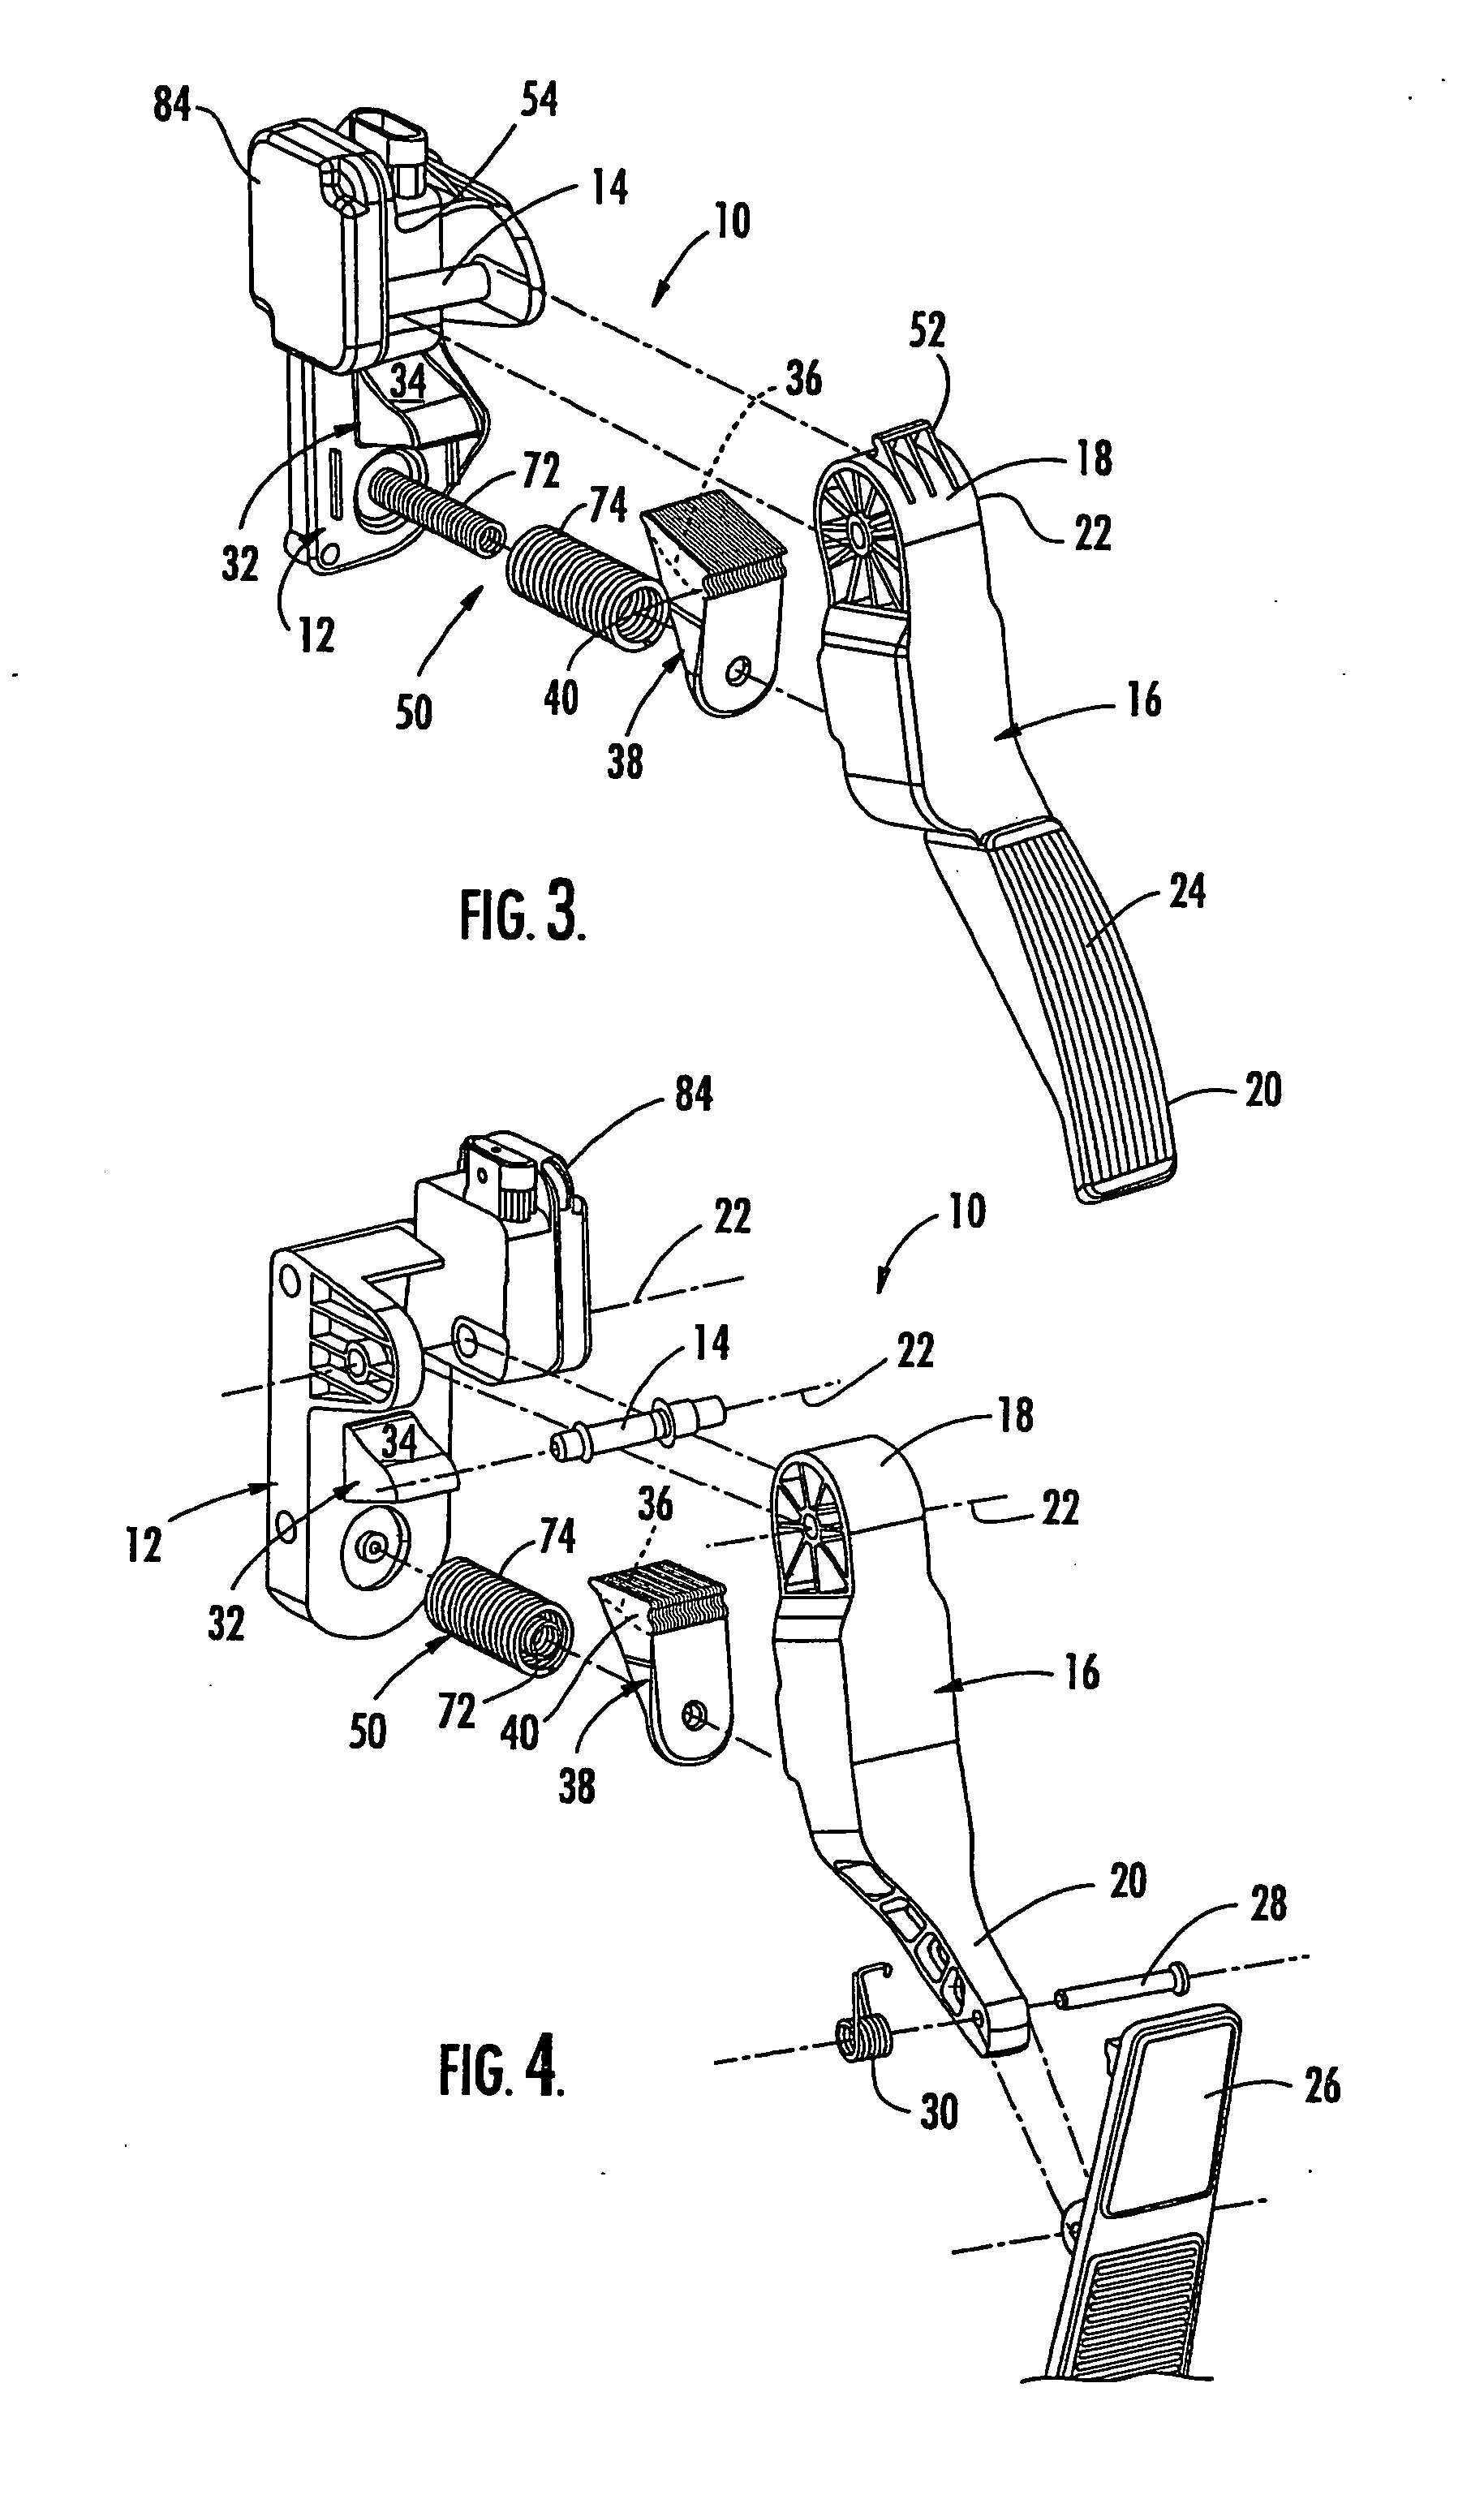 Electronic pedal assembly and method for providing a tuneable hysteresis force